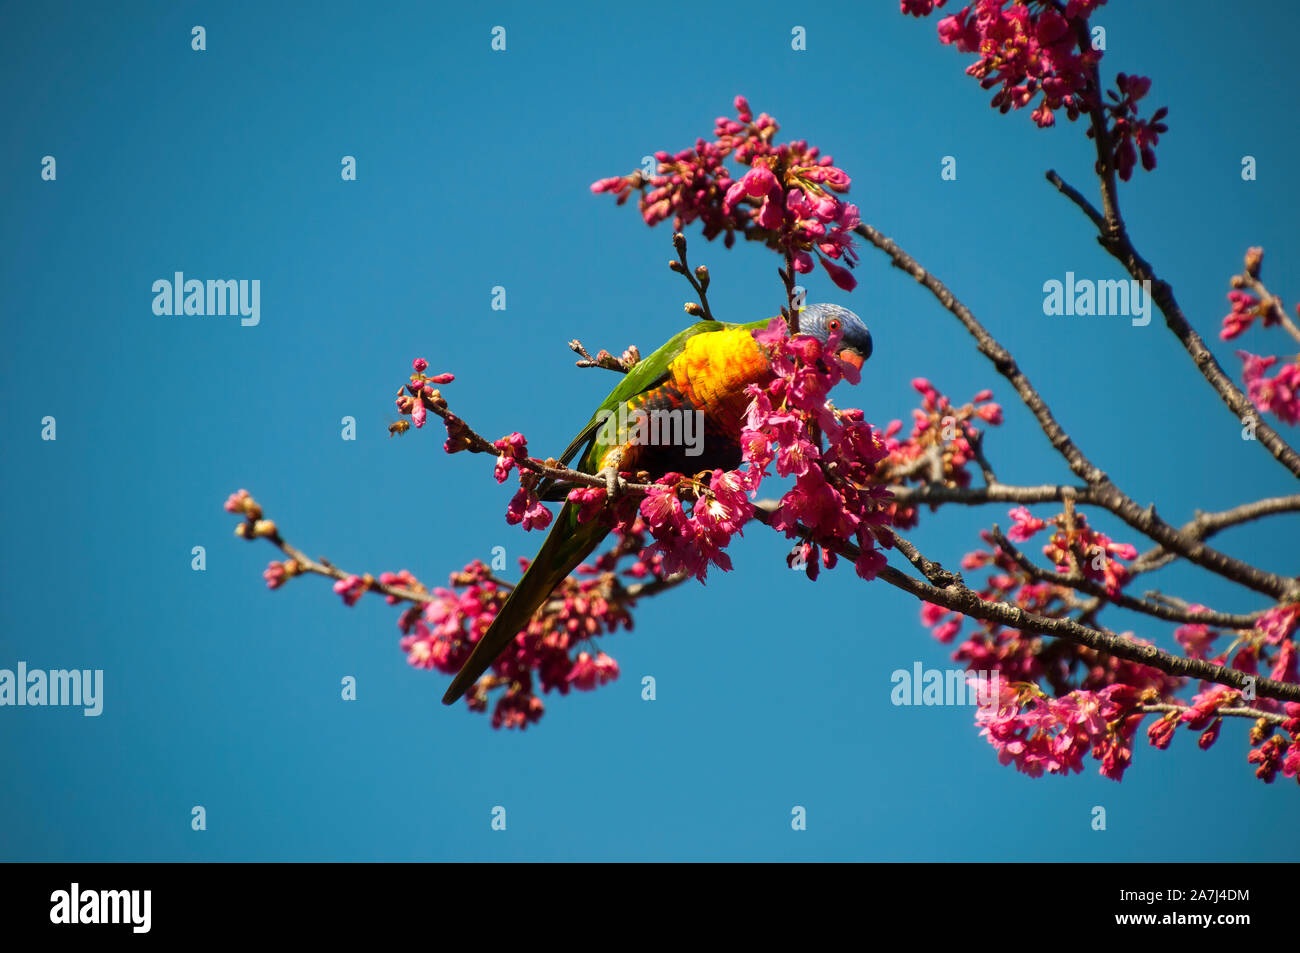 Sydney Australia, rainbow lorikeet feeding in flowering fruit tree with bright pink blossoms against a blue sky Stock Photo